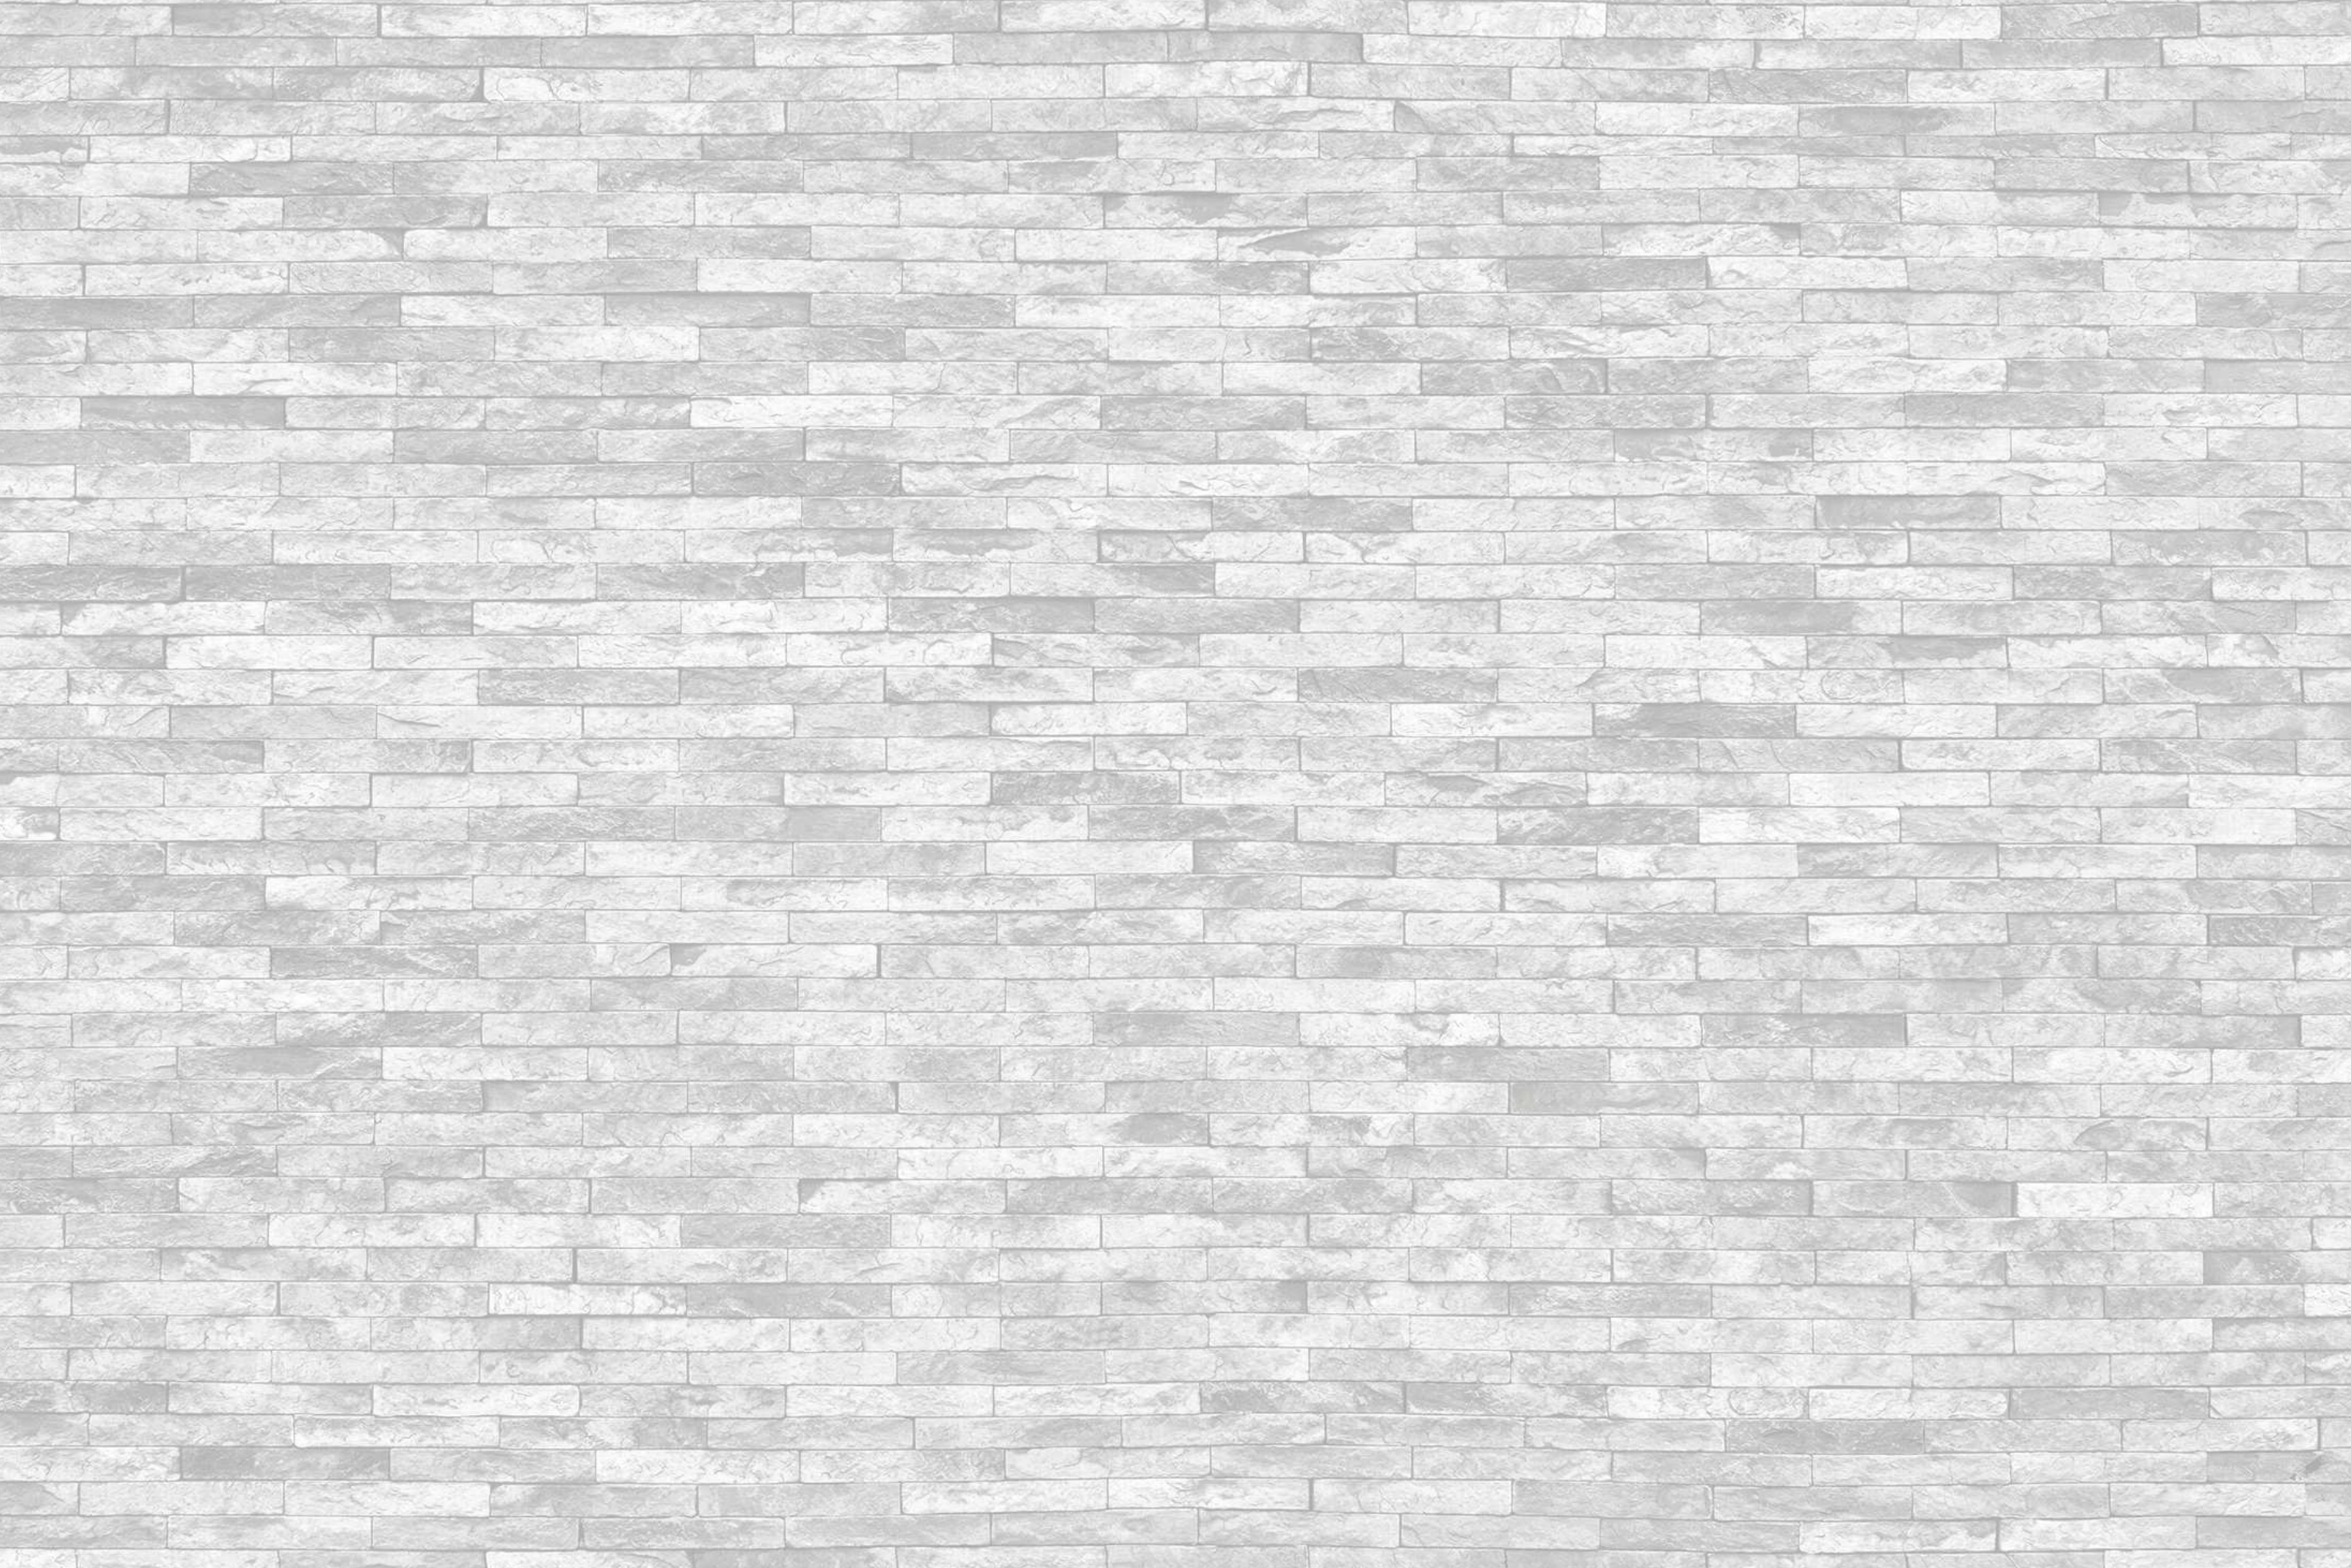 ColourDrive-Korean Wallpaper Tiny Stone 88432 House Wall Wallpaper Design for Kitchen Room,Study Room,Guest Room